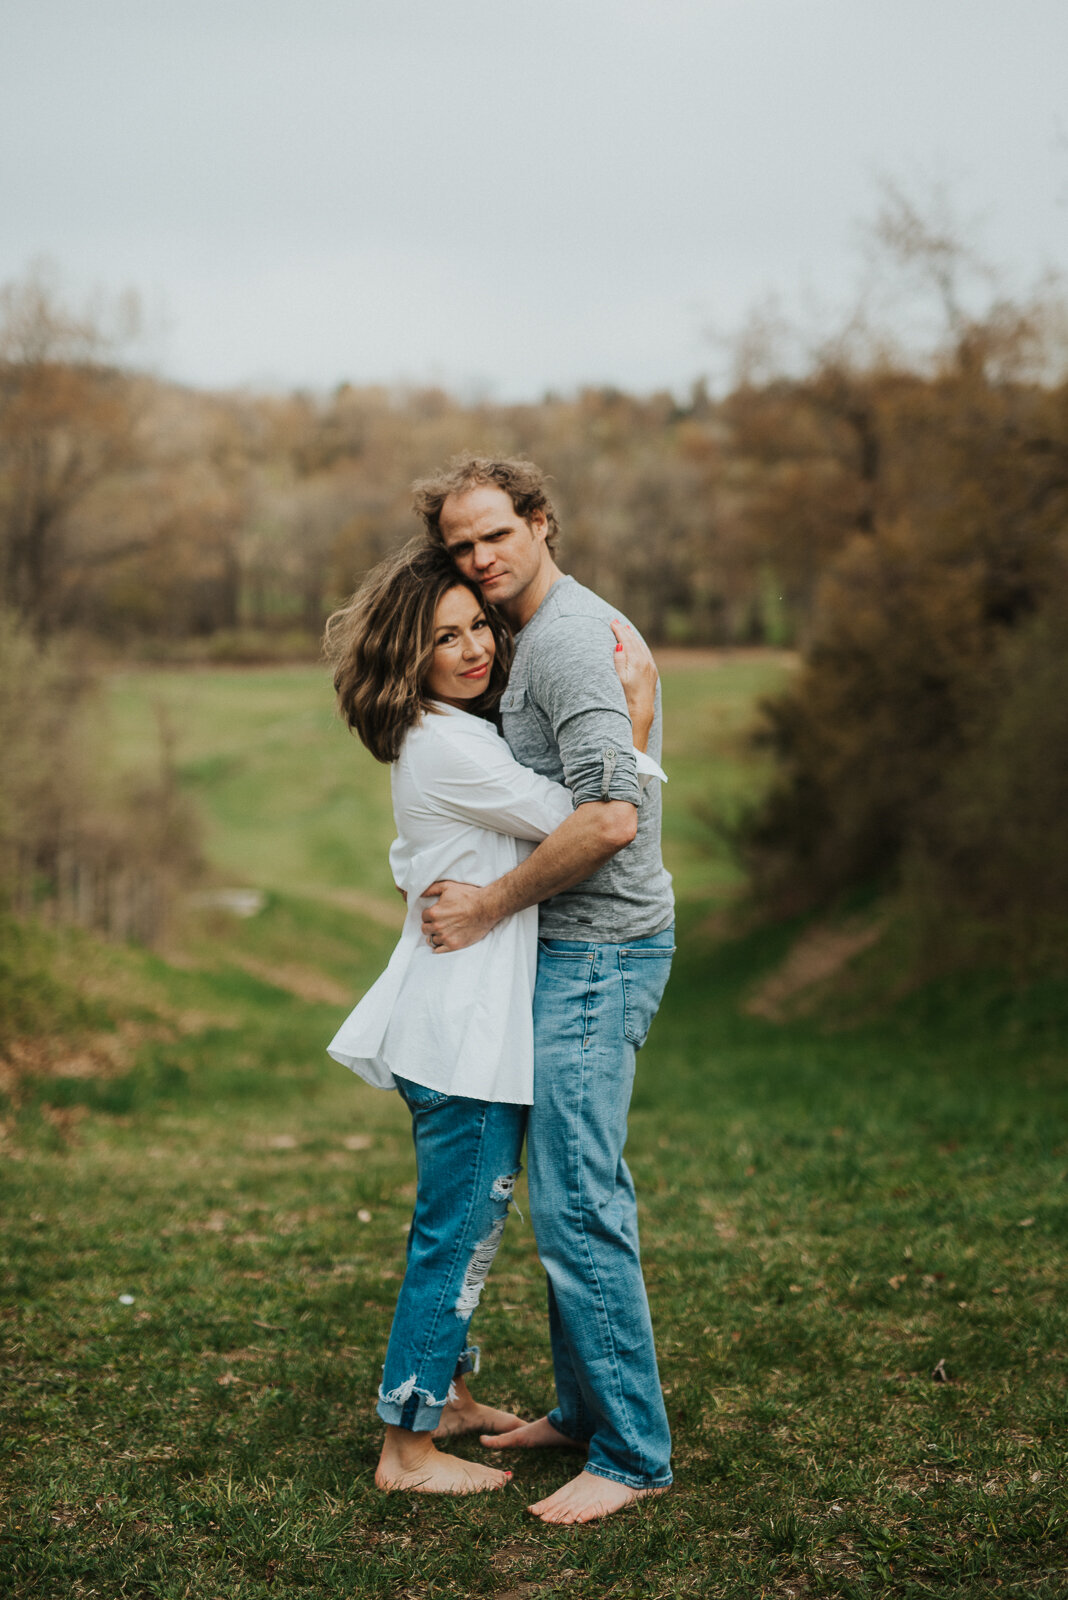 Calvin Klein Inspired Outdoor Couples Session — Rachelle Welling Photography